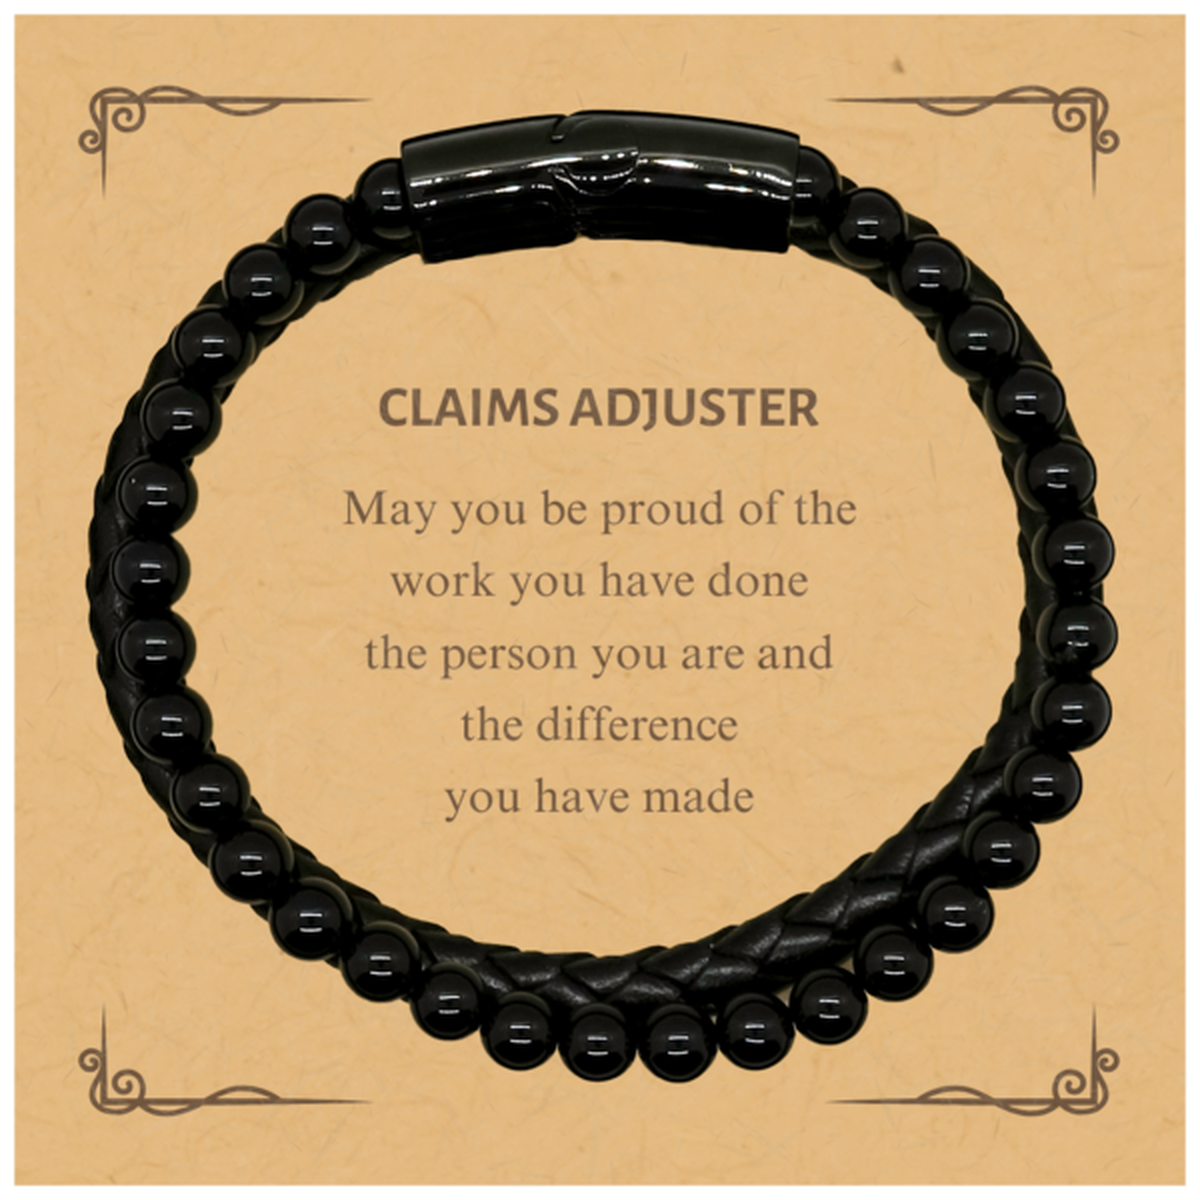 Claims Adjuster May you be proud of the work you have done, Retirement Claims Adjuster Stone Leather Bracelets for Colleague Appreciation Gifts Amazing for Claims Adjuster